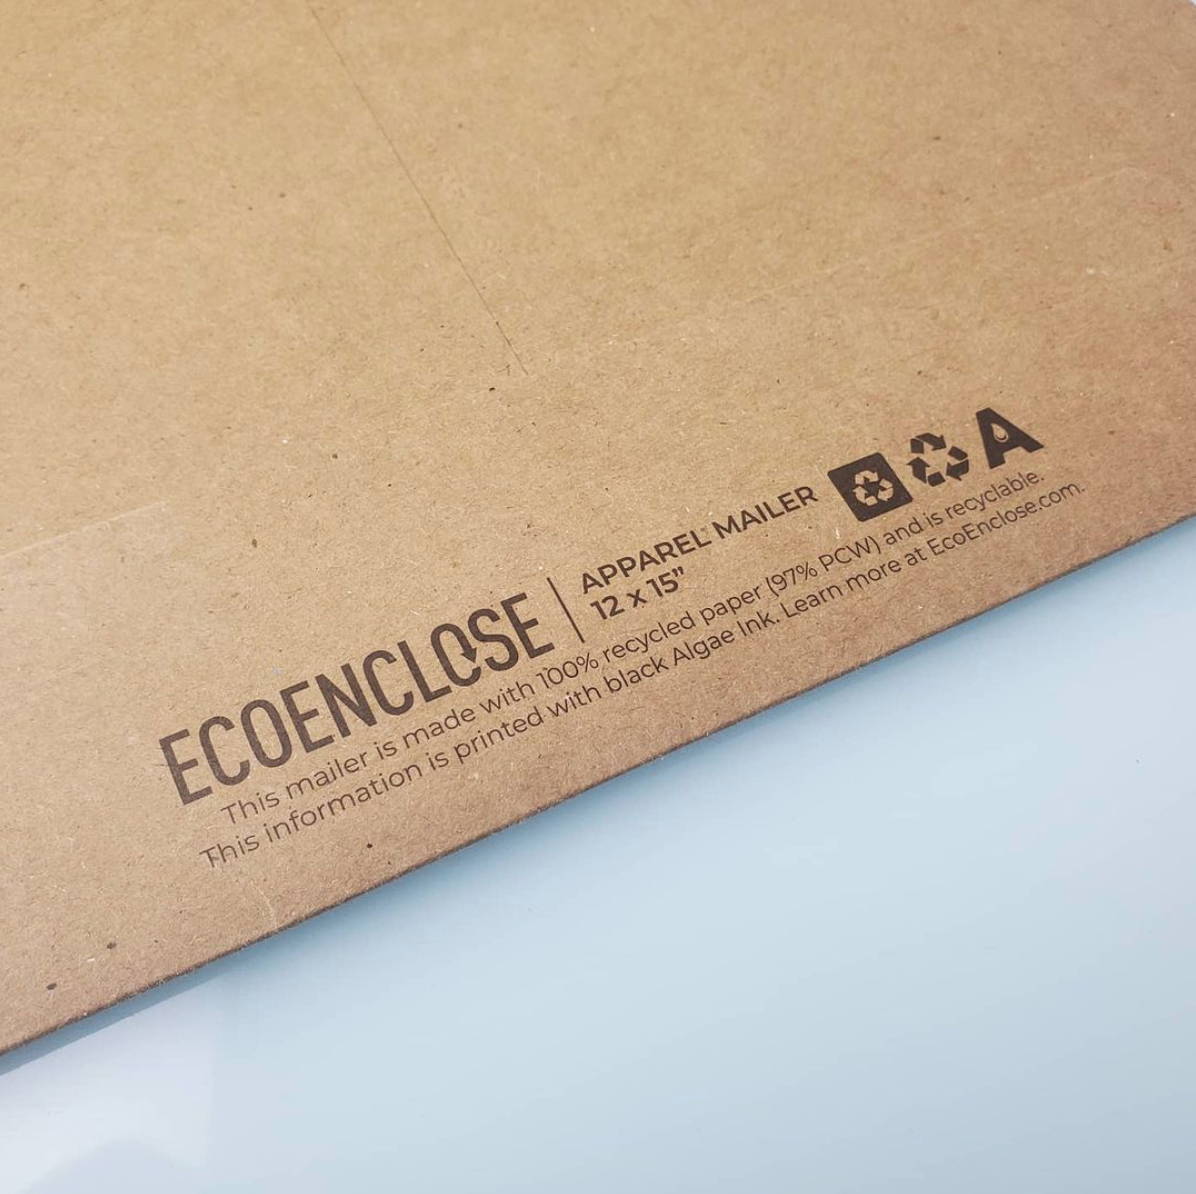 "EcoEnclose apparel mailer 12" x 15". Recycled/recyclable symbols. "This mailer is made with 100% recycled paper (97%PCW) and is recyclable. This information is printed with black Algae ink. Learn more at EcoEnclose.com"